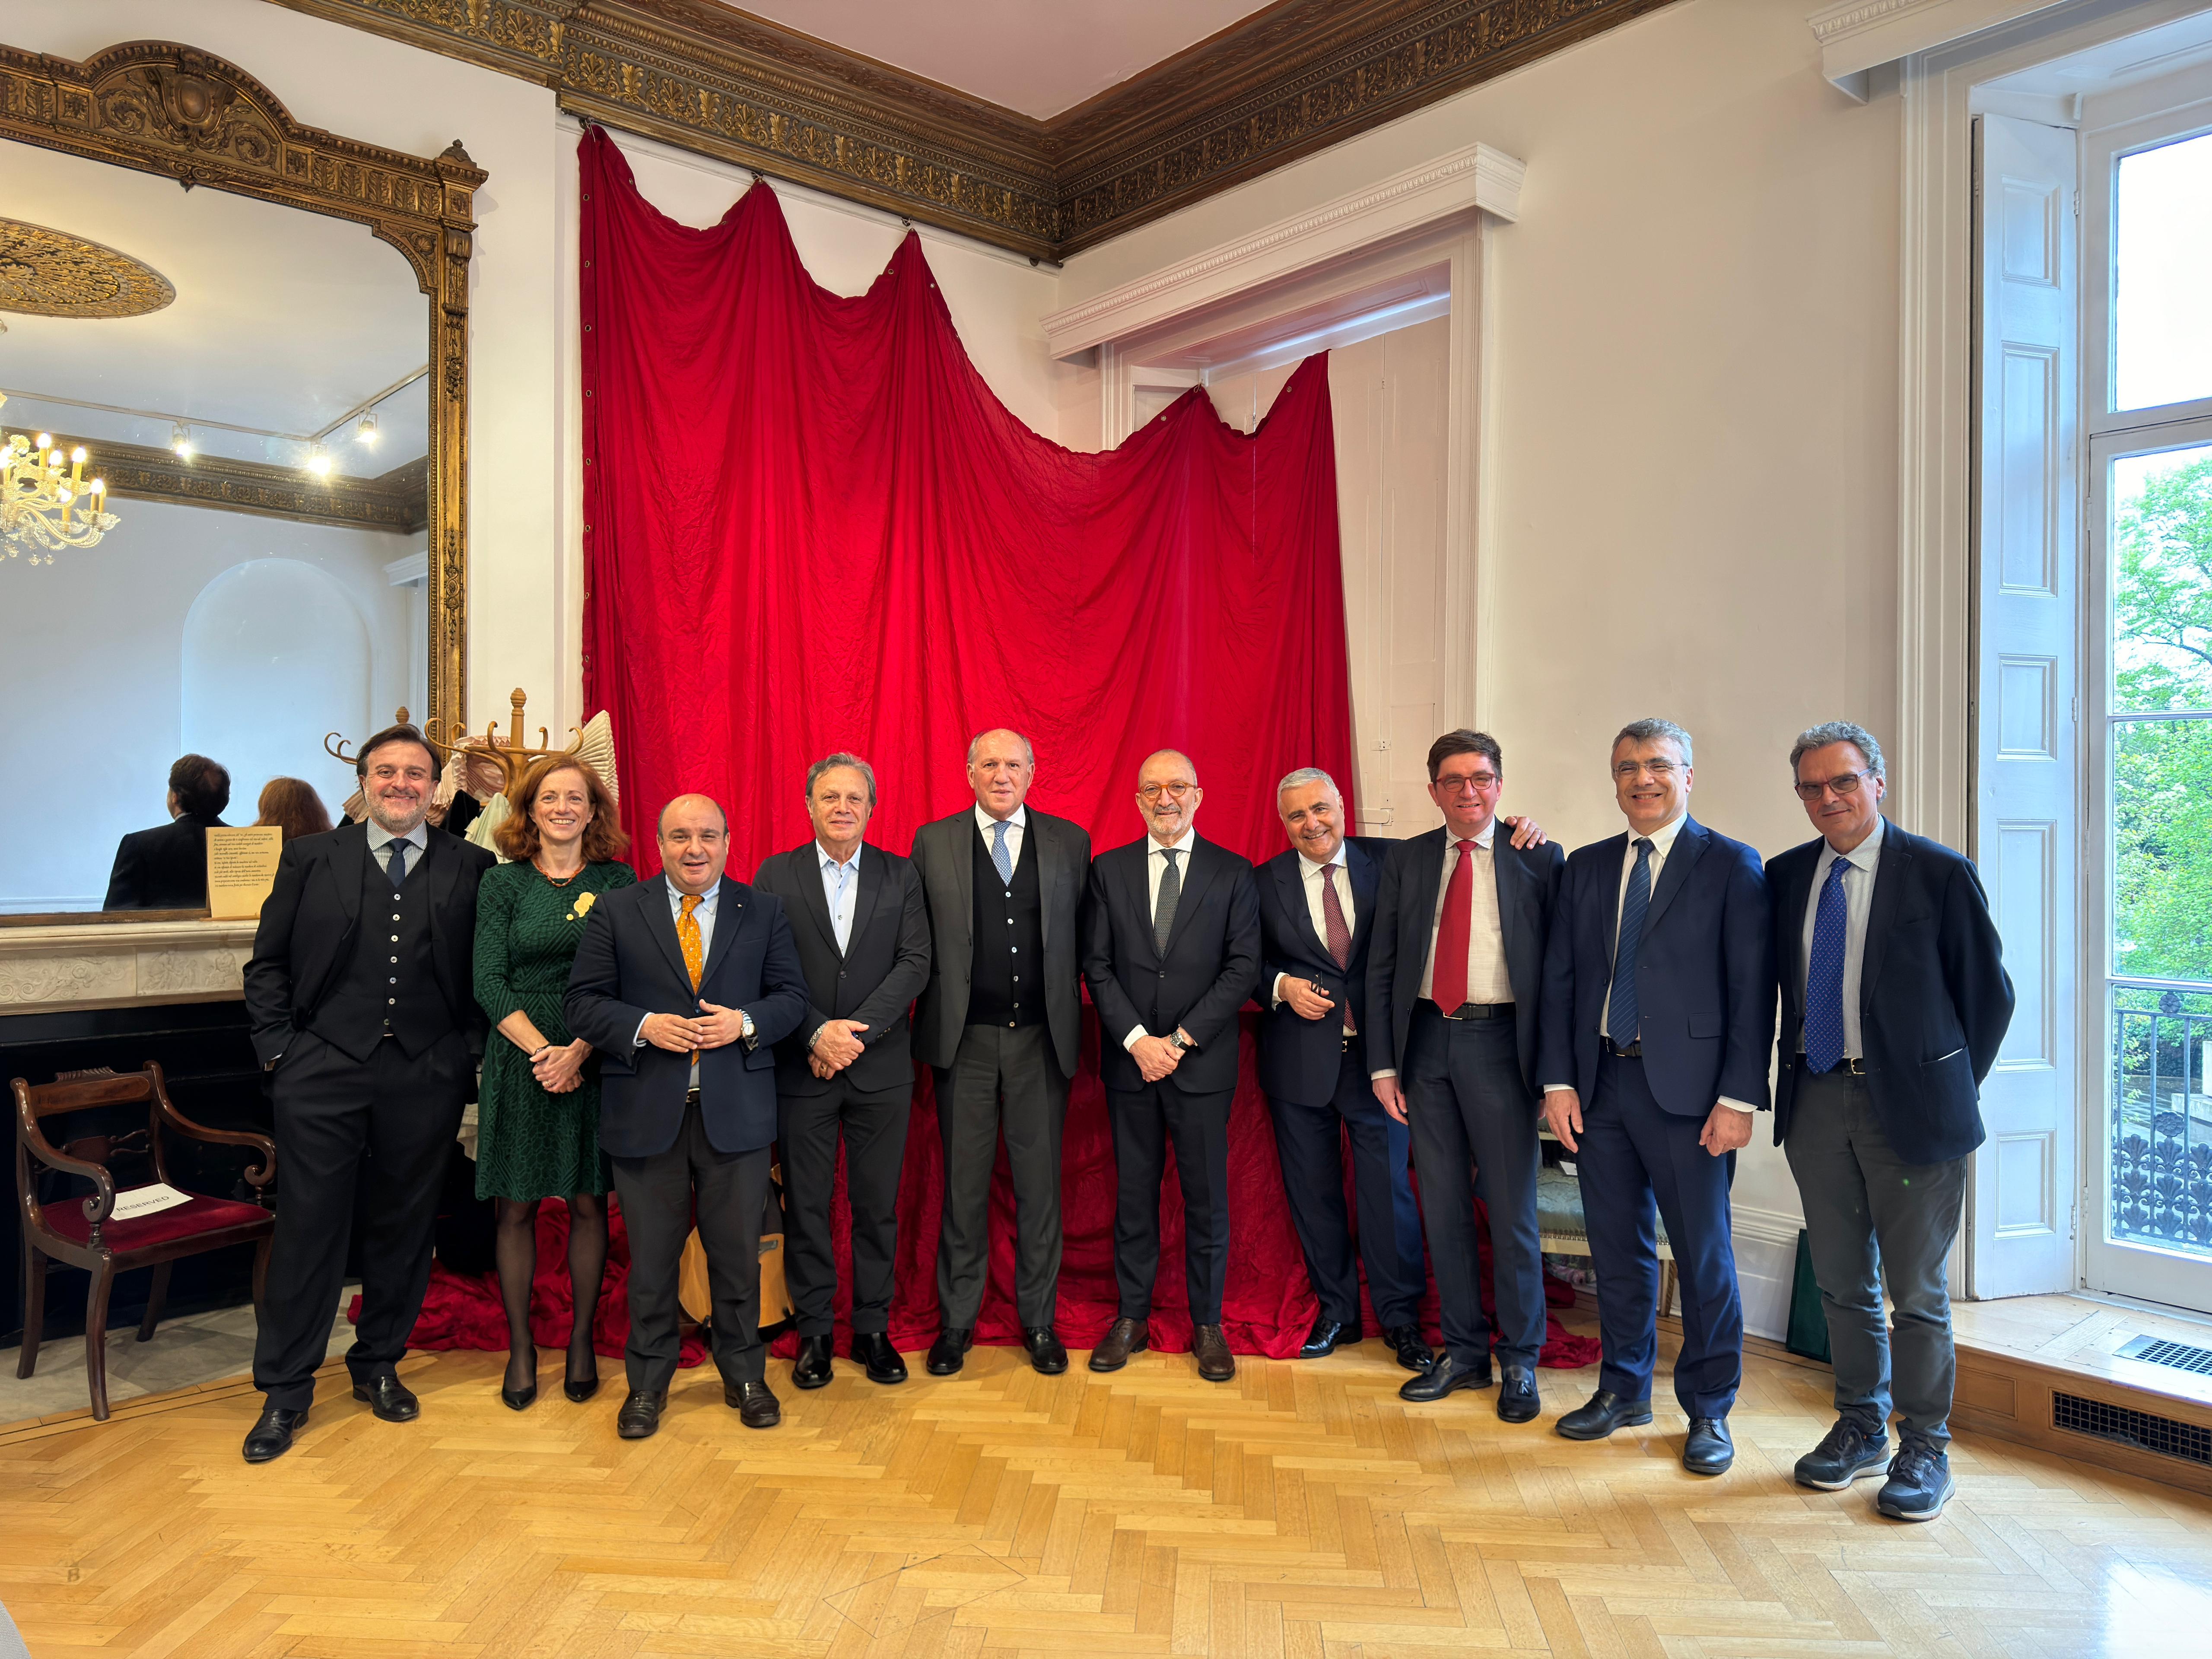 The closing of the project for the 400th anniversary of the Goldoni Theatre at the Italian Cultural Institute in London